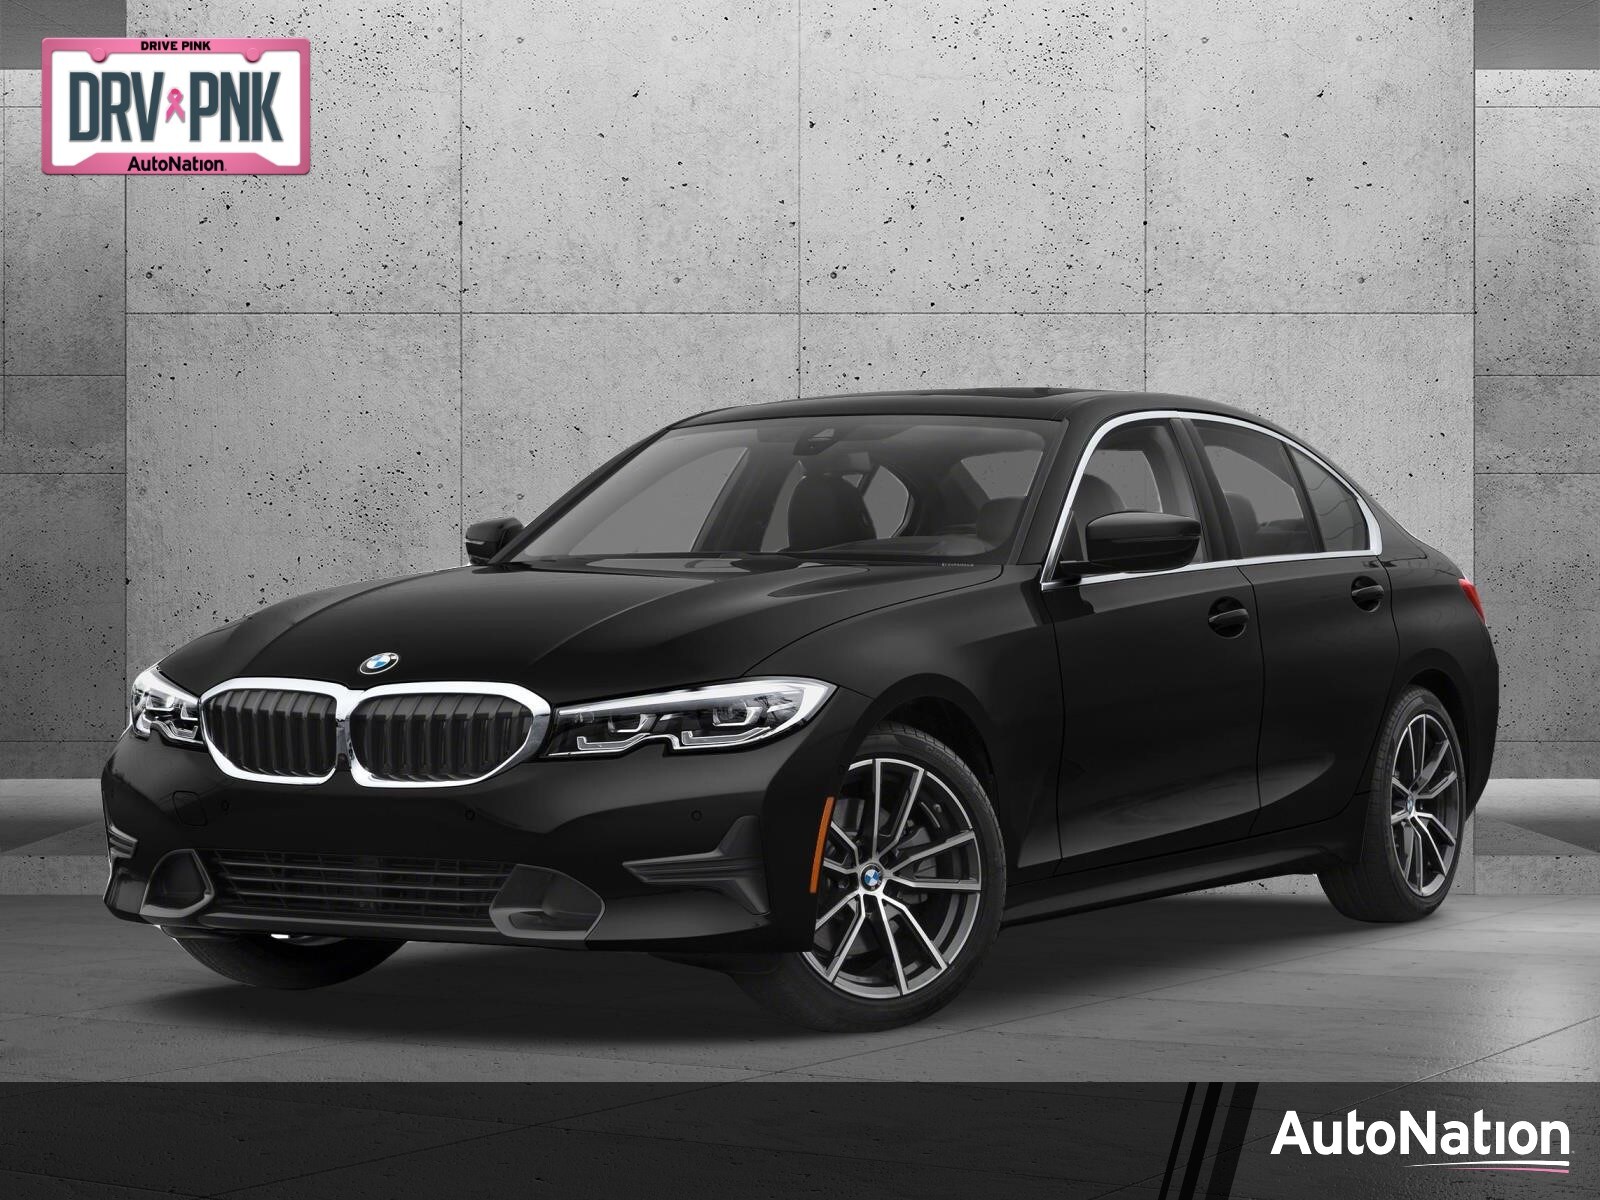 Used Bmw 3 Series Mountain View Ca